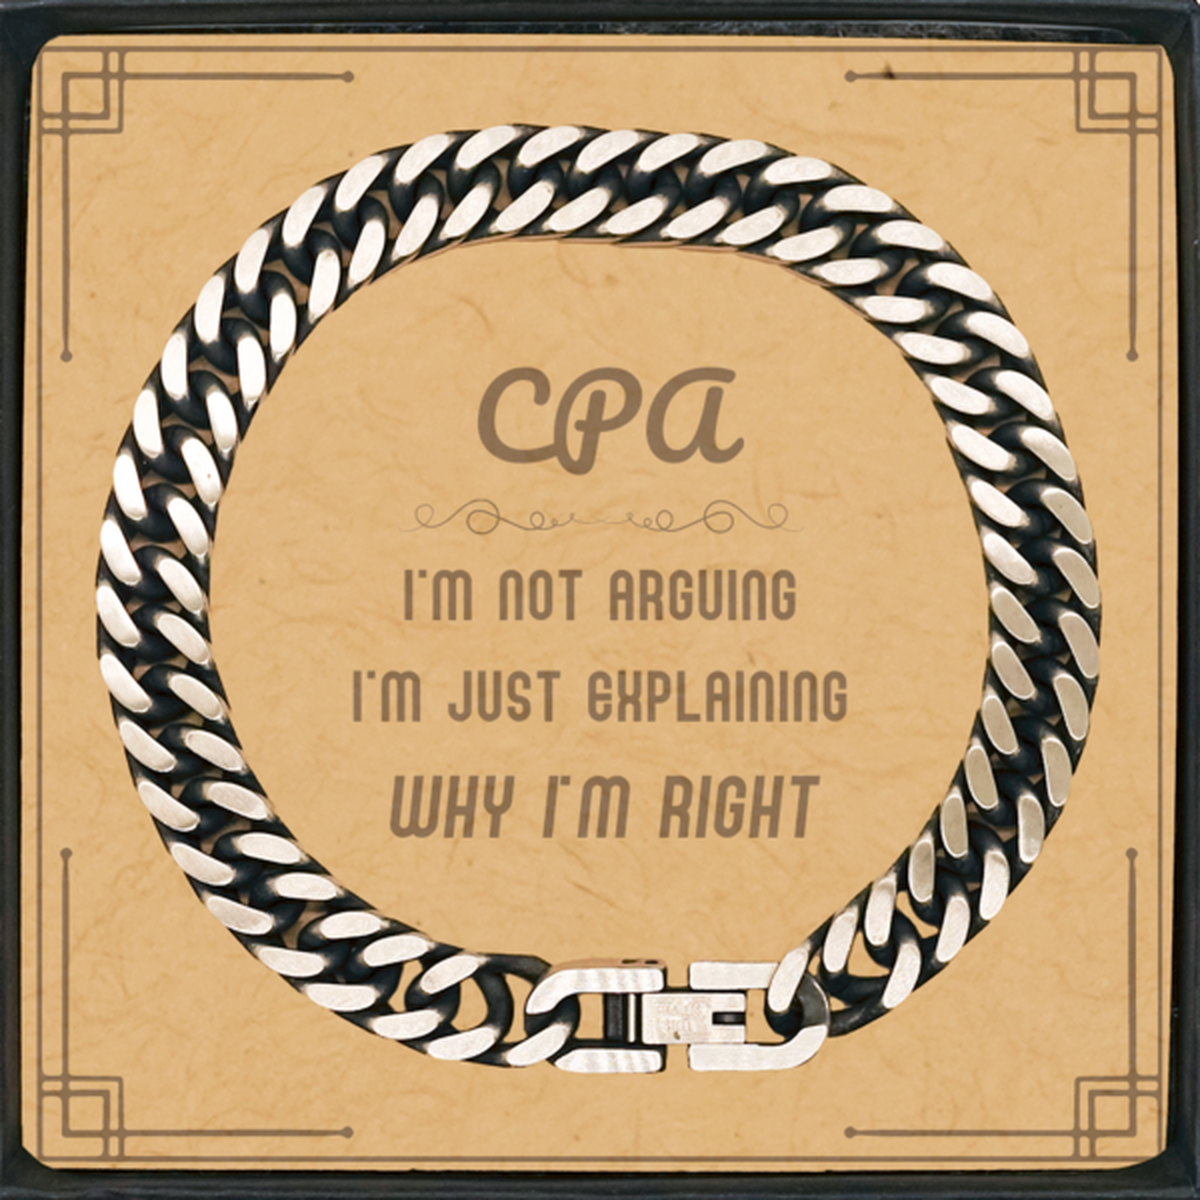 CPA I'm not Arguing. I'm Just Explaining Why I'm RIGHT Cuban Link Chain Bracelet, Funny Saying Quote CPA Gifts For CPA Message Card Graduation Birthday Christmas Gifts for Men Women Coworker